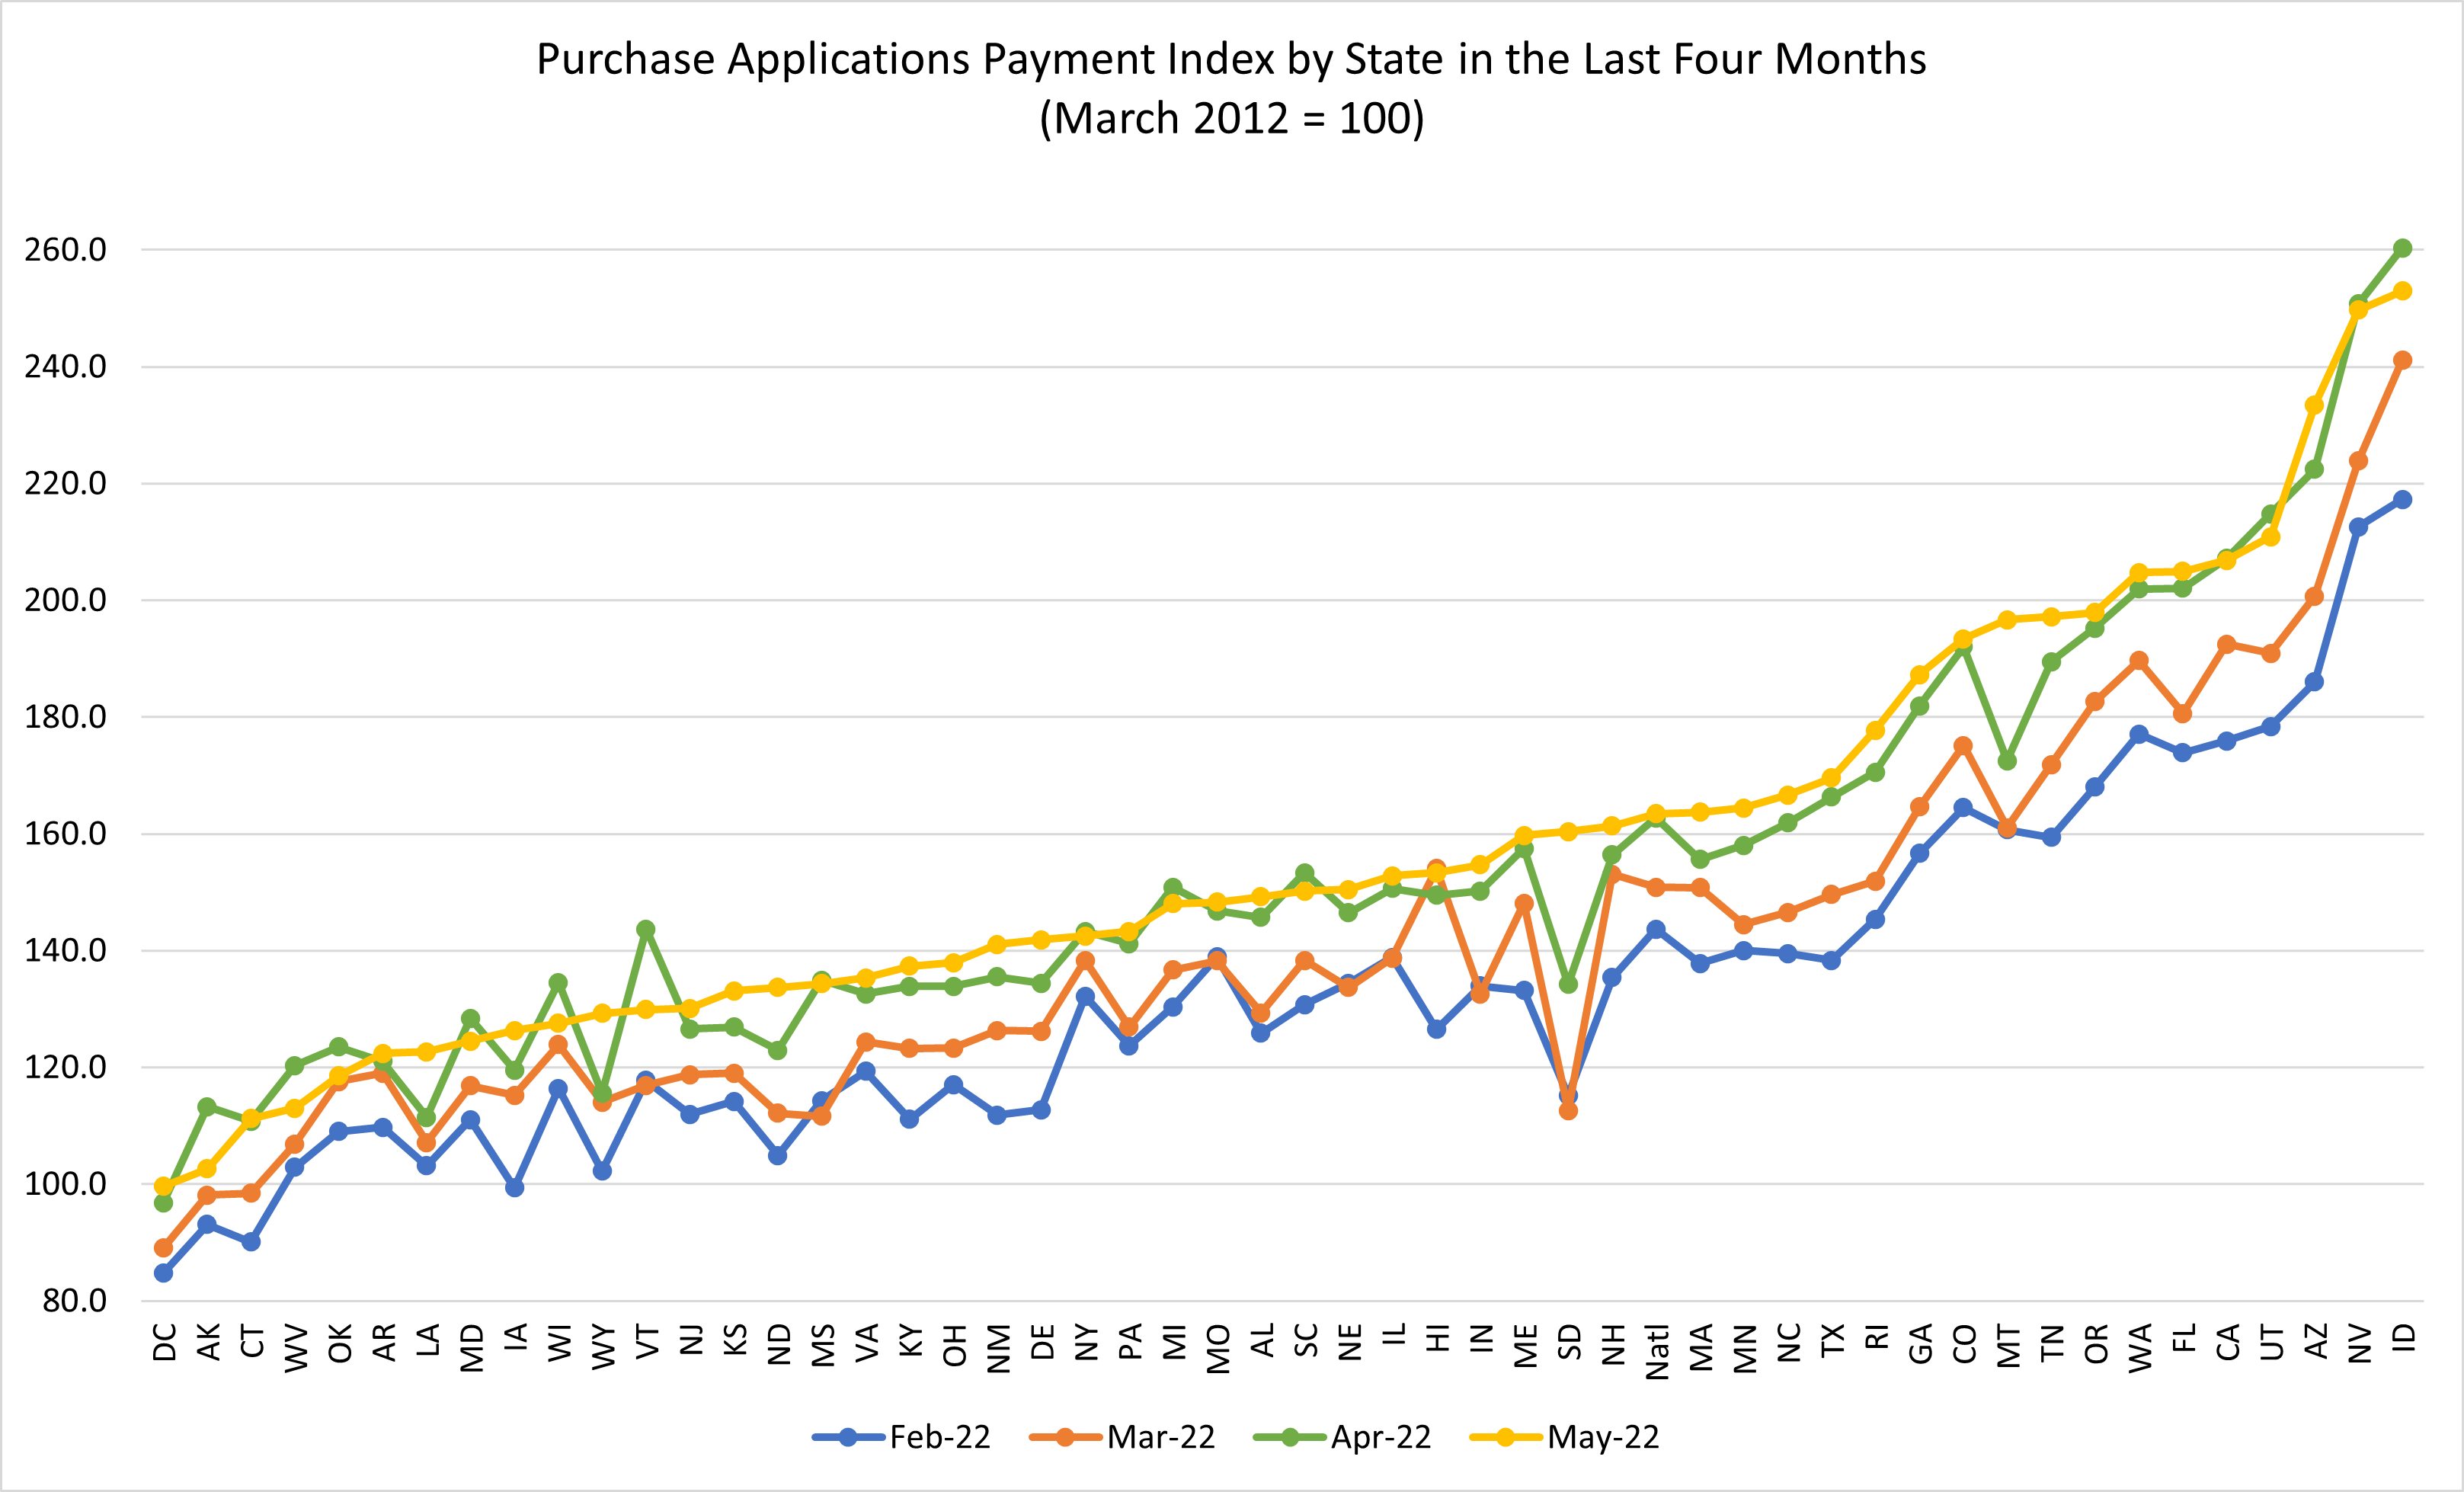 Purchase Applications Payment Index by State in the Last Four Months (March 2012 - 100)